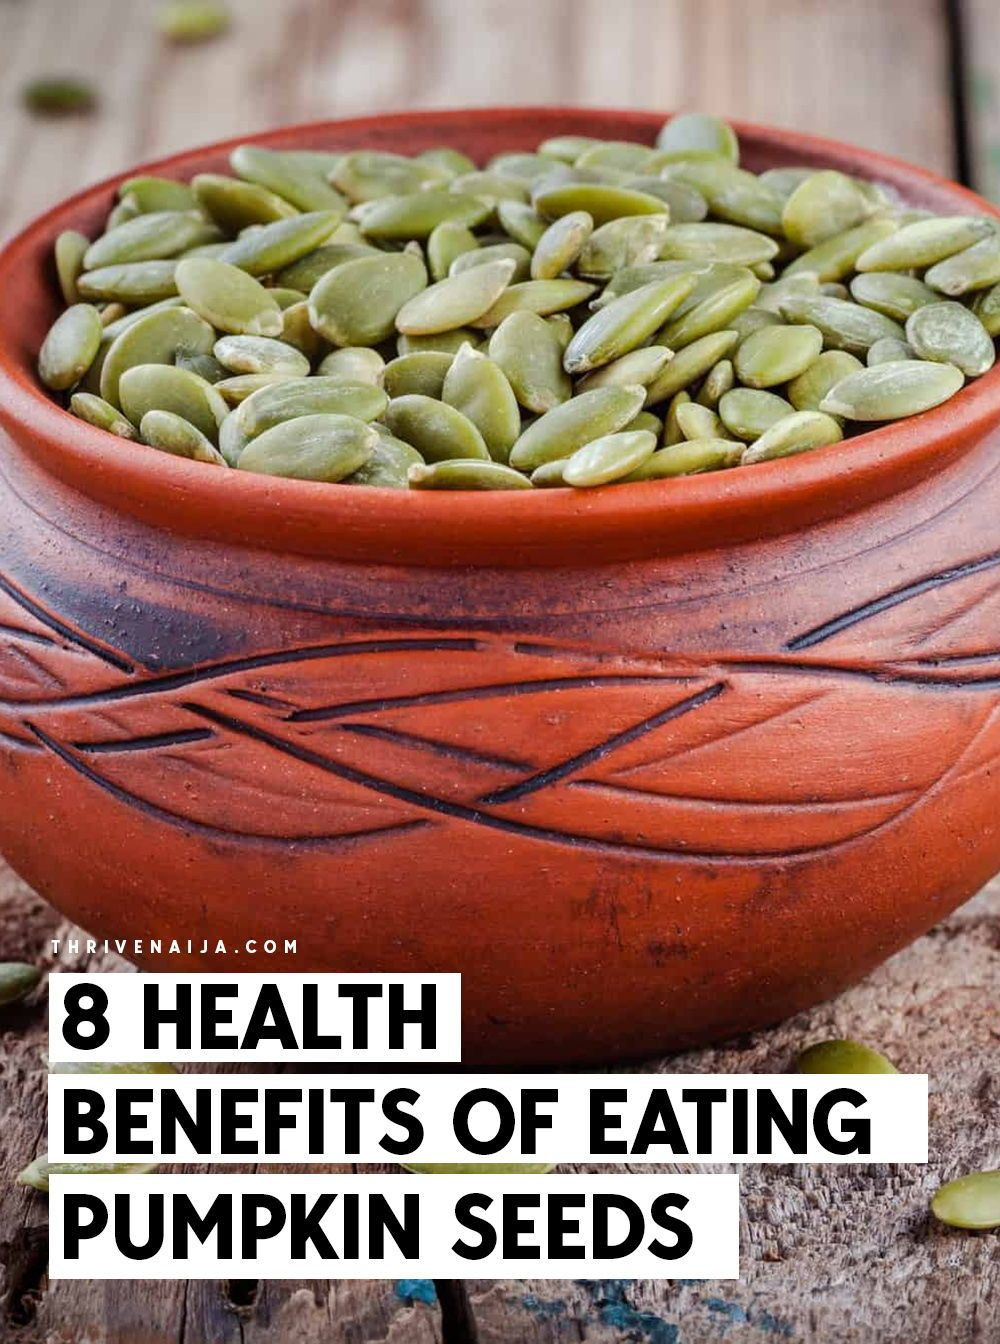 Fiber In Pumpkin Seeds
 What Are The Benefits of Eating Pumpkin Seeds